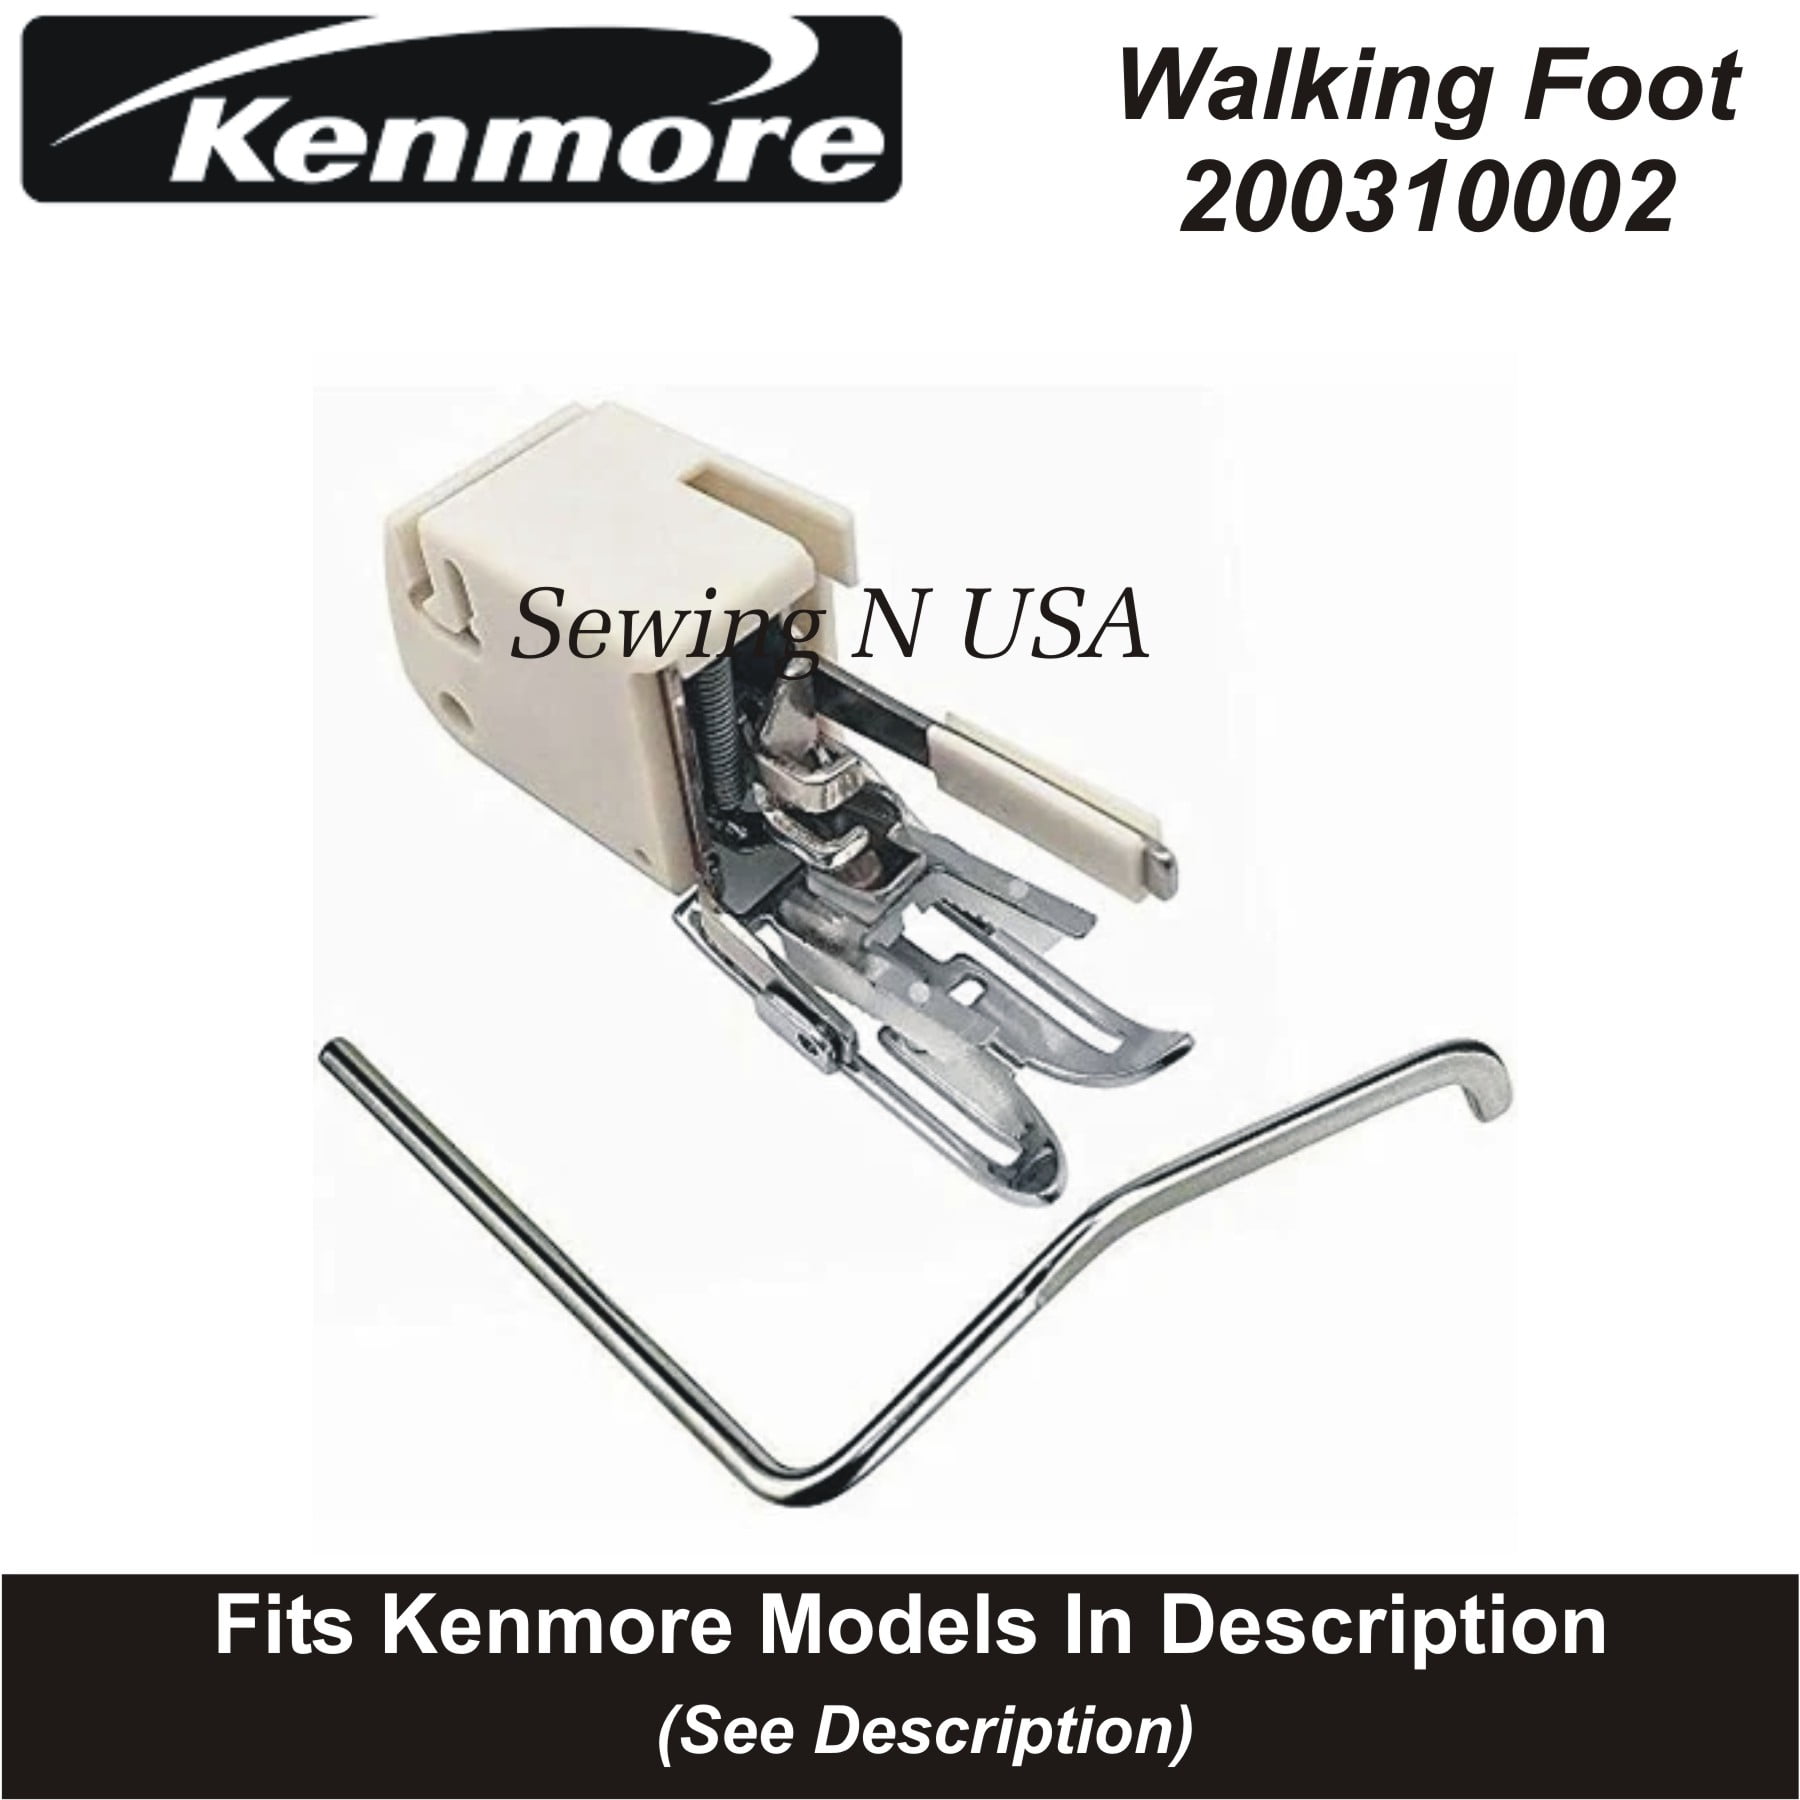 Walking Foot Feet Low Shank Even Feed With Guide New Home Janome 214872011 